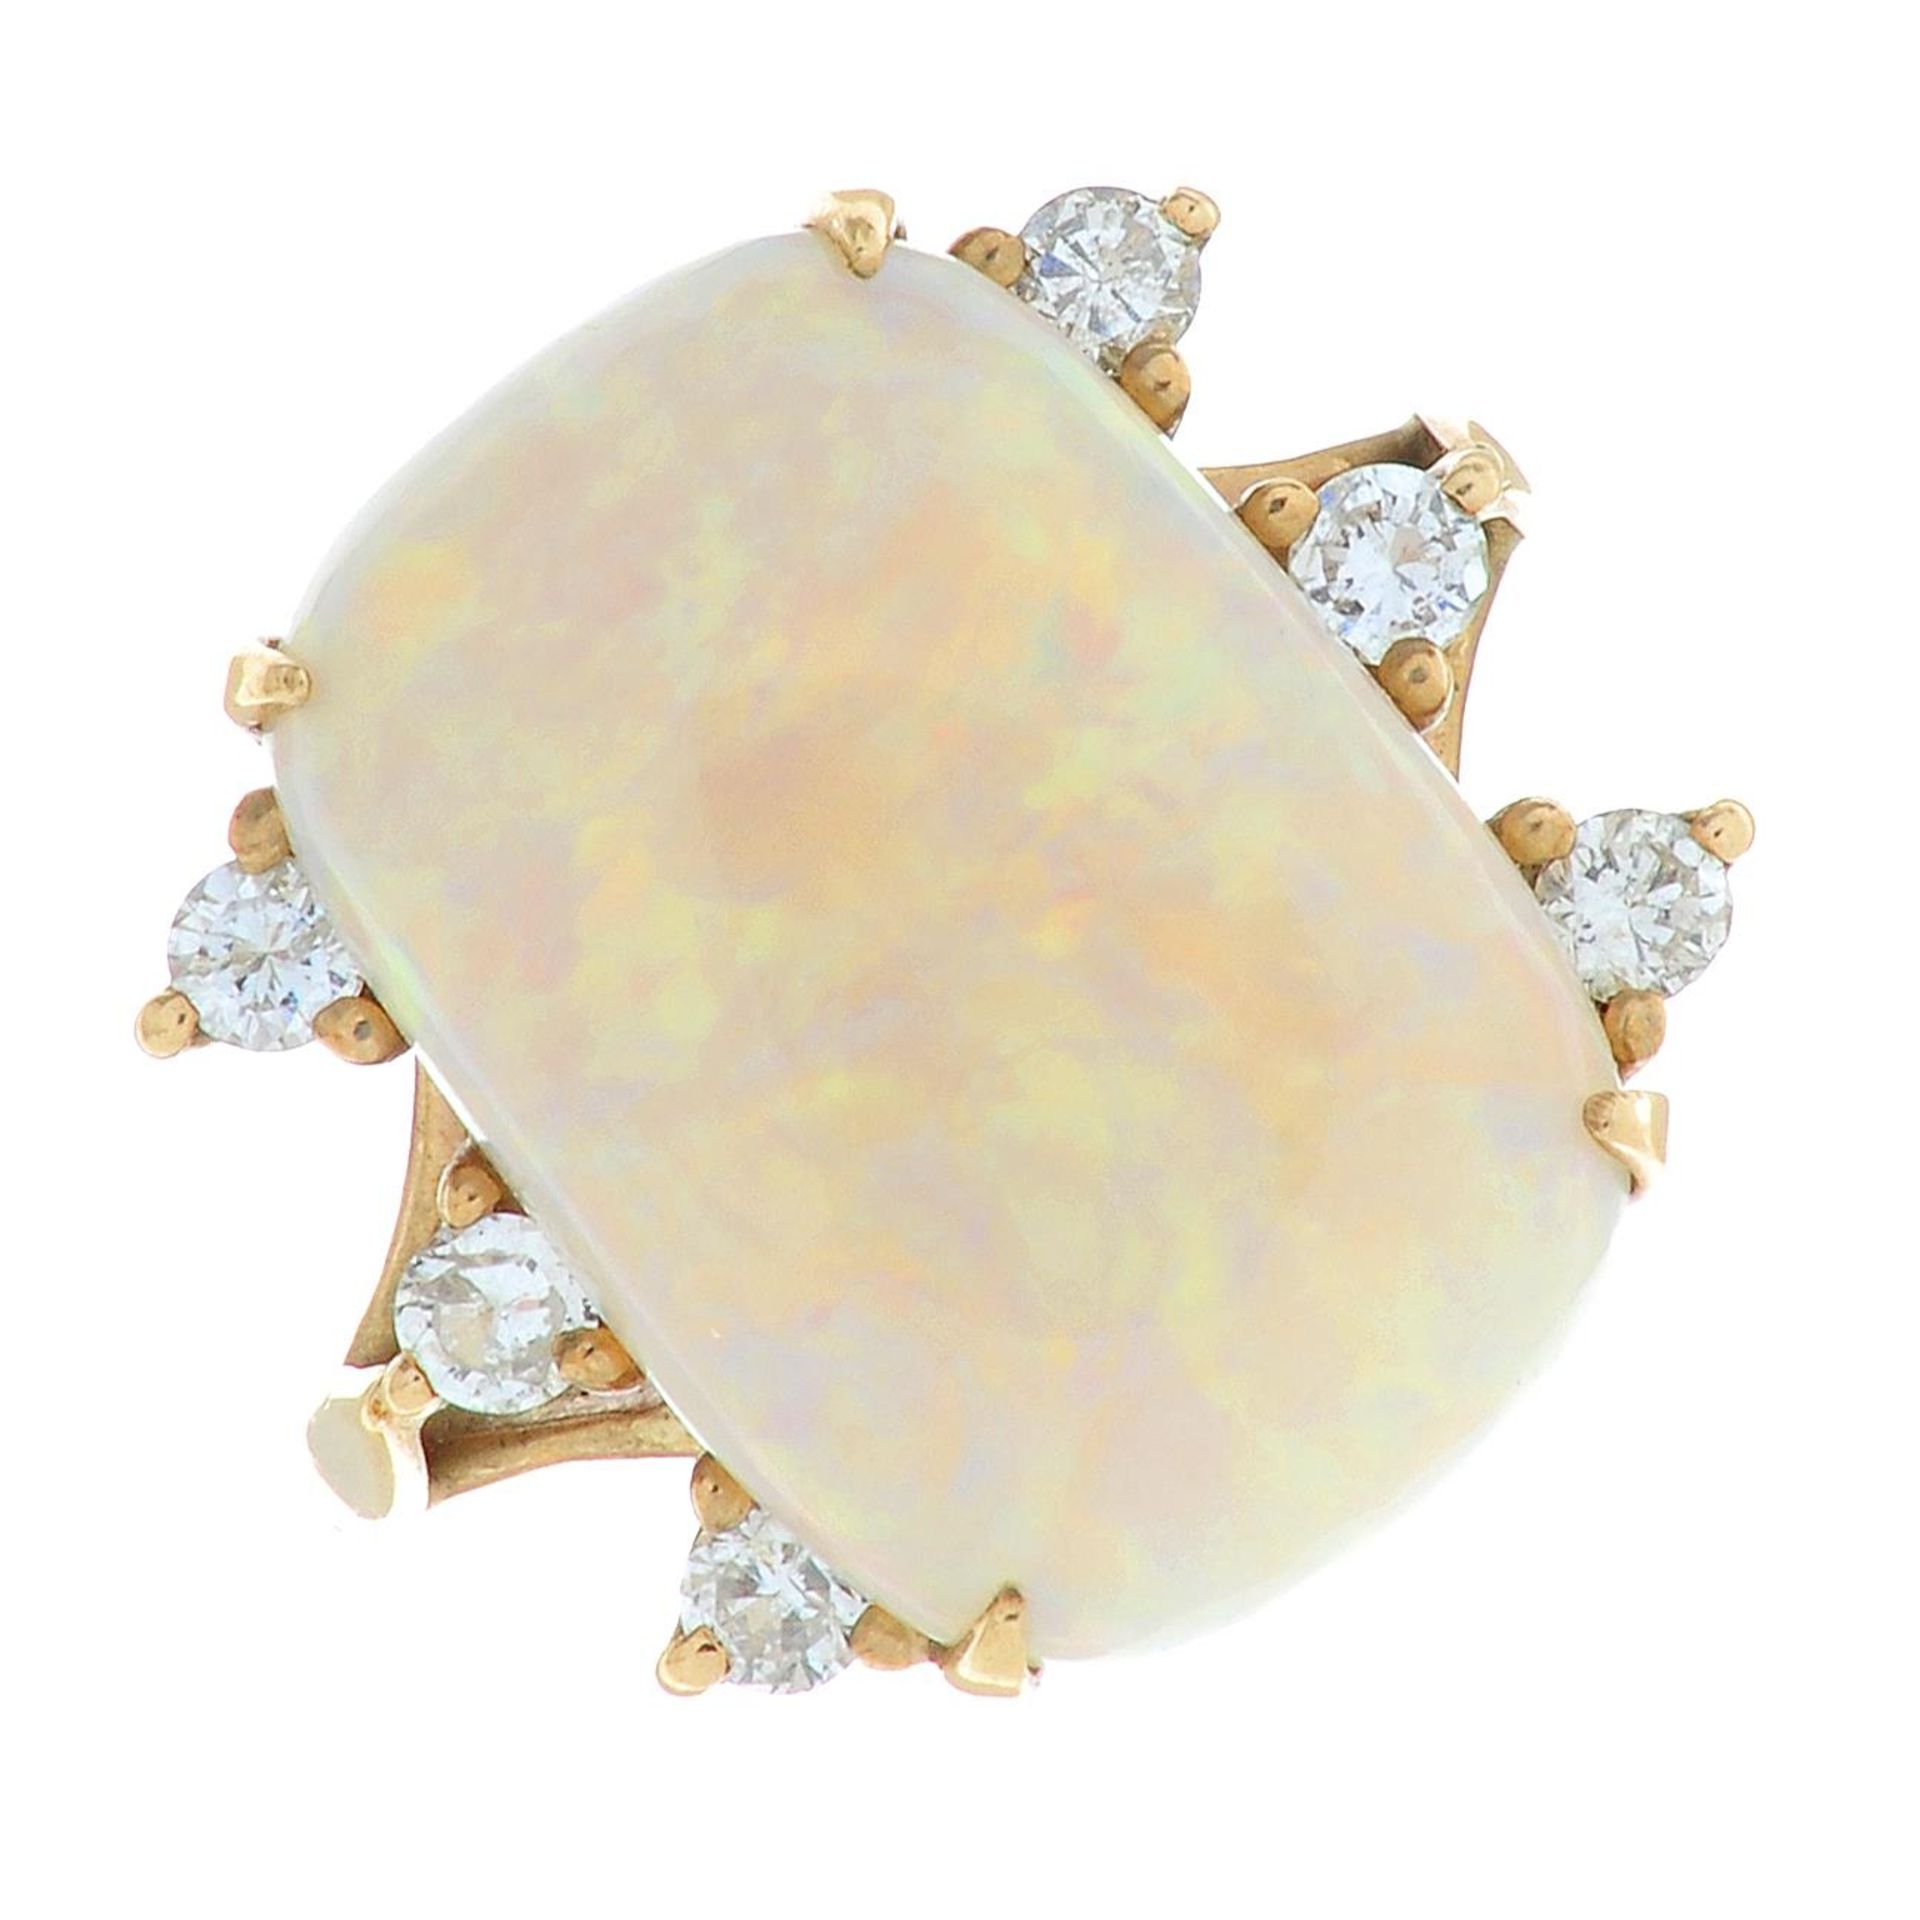 A 9ct gold opal and brilliant-cut diamond dress ring.Estimated opal dimensions 17.2 by 11.8 by